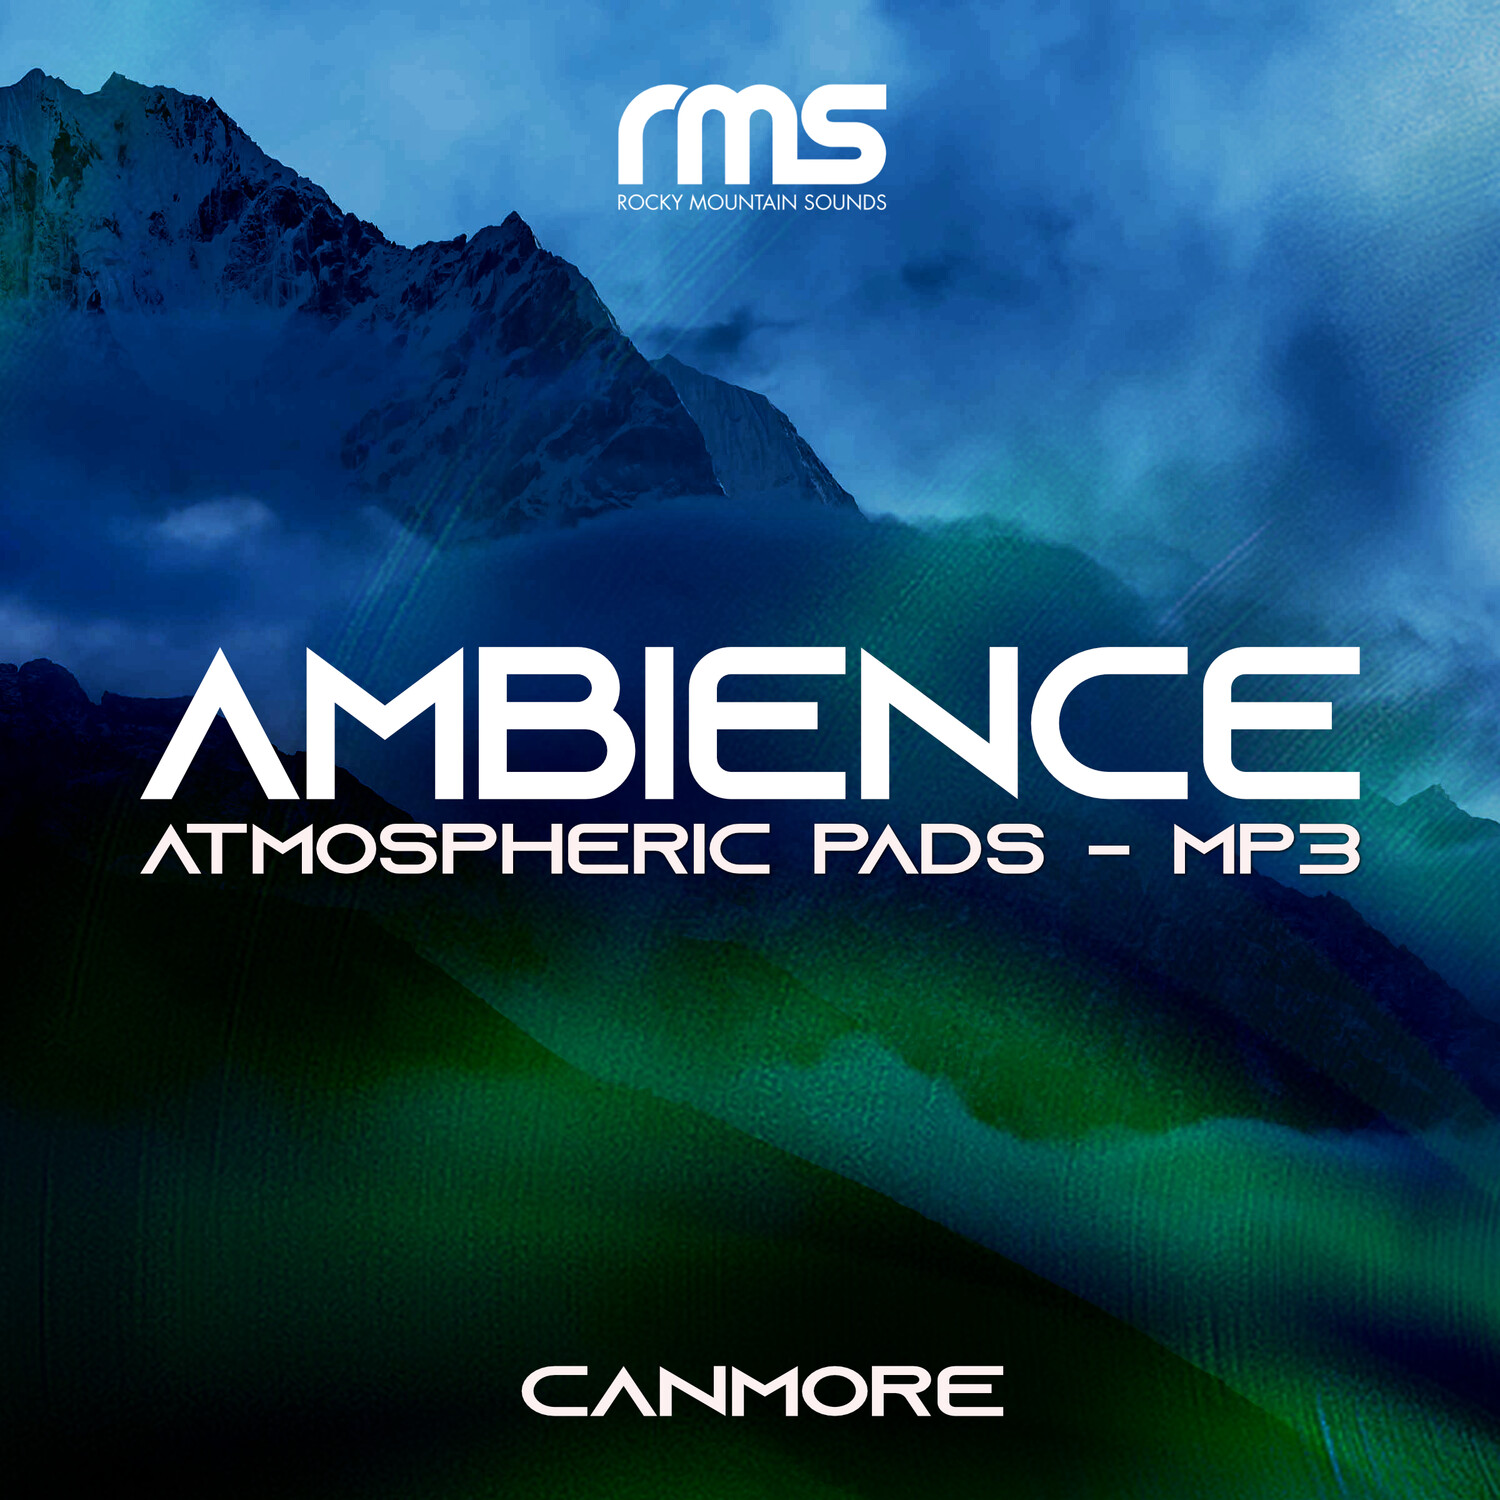 [WSBT] Ambience Canmore Pads